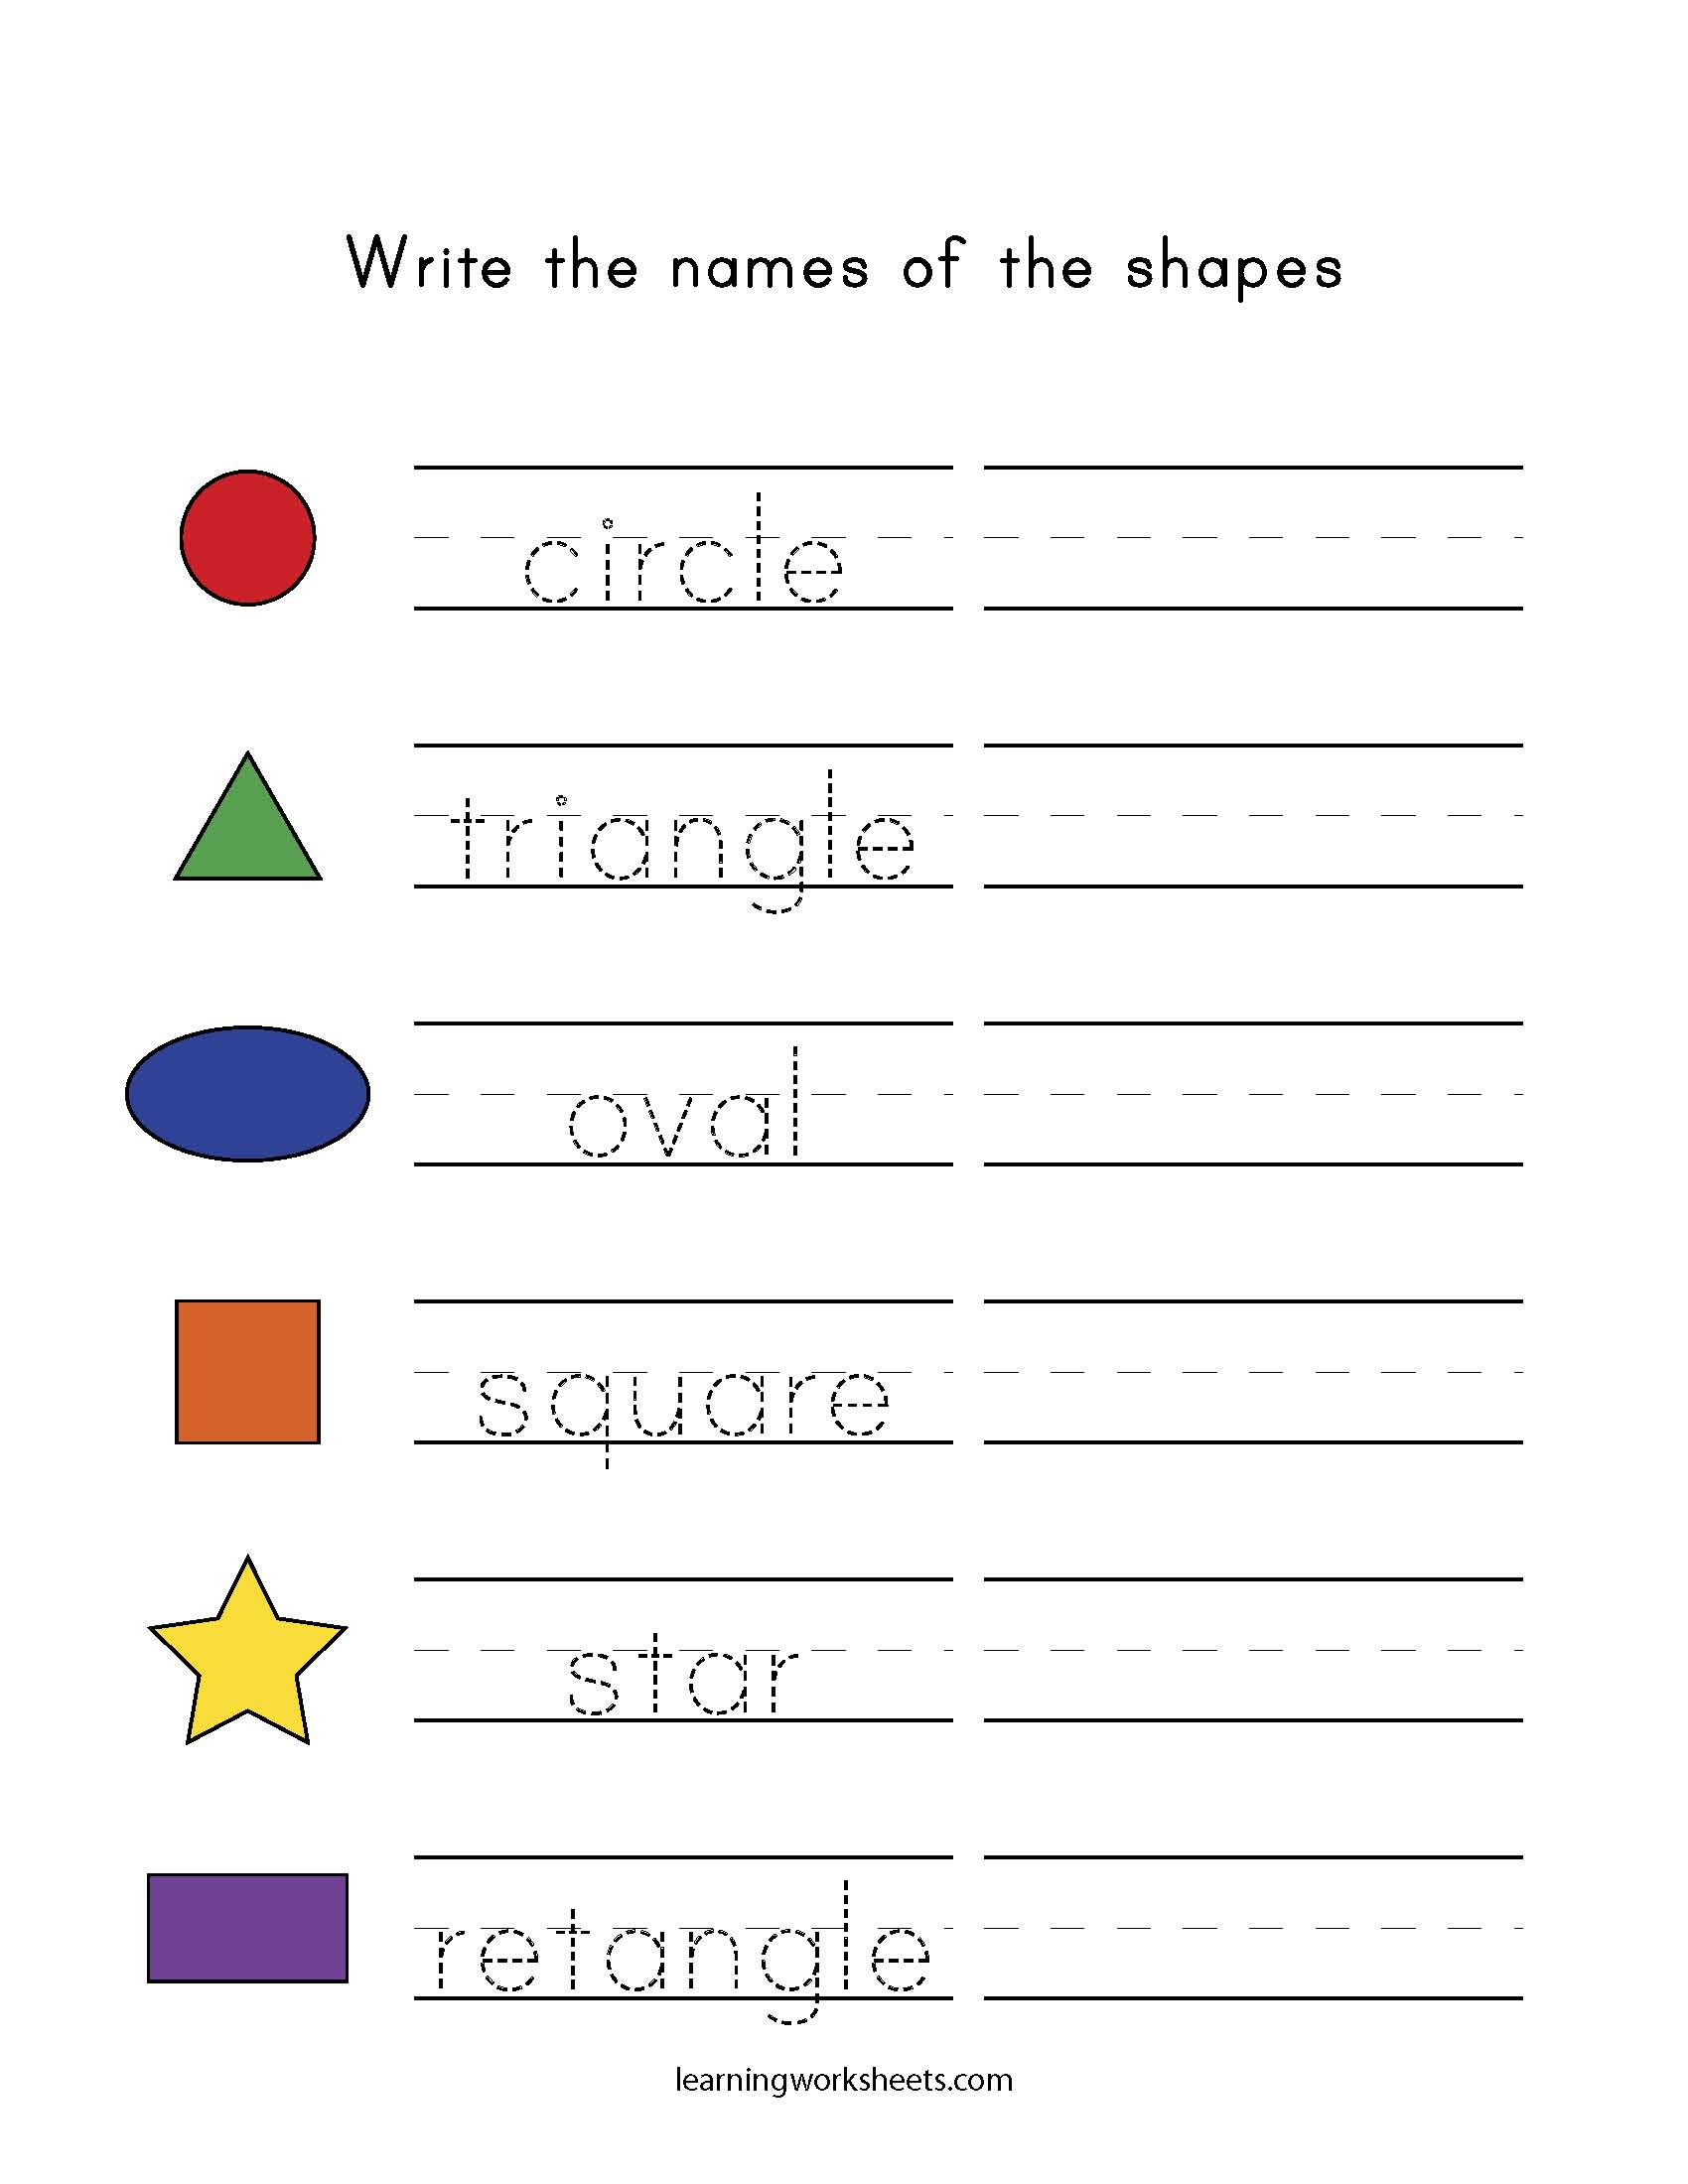 write-the-names-of-the-shapes-learning-worksheets-mixed-shapes